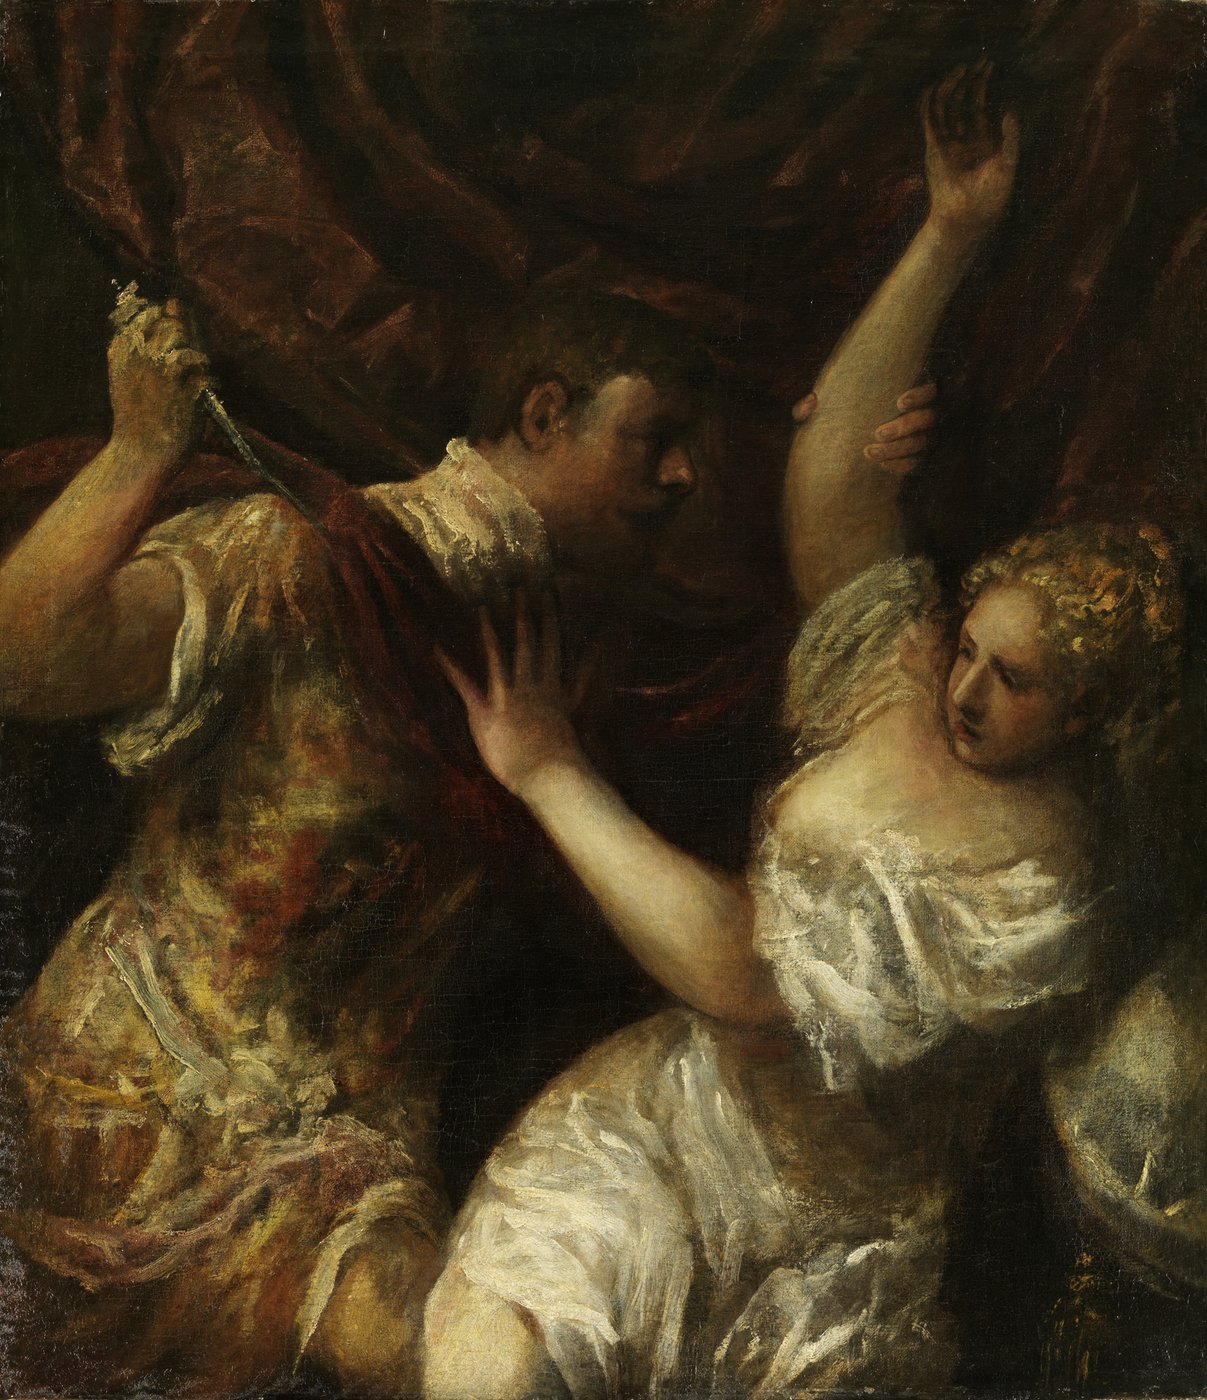 The portrait-format painting depicts a dramatic and violent moment in which Tarquinius threatens Lucretia with a dagger. Lucretia tries to push him away with her left arm, Tarquinius in turn holds her right arm and tries to pull her towards him. A dramatic tension is created by her defence and his violent approach. Lucretia wears a white dress that has slipped so much that half of her right breast is being exposed. The background is taken up by a dark red curtain, which makes the entire pictorial space seem constricted. The drama of the scene is heightened by the painting technique and the play of colour. There are no clear lines and neither the figures nor the space have been worked out particularly vividly. Thus, the painting appears two-dimensional and the brushstrokes with their dynamism almost sketchy.